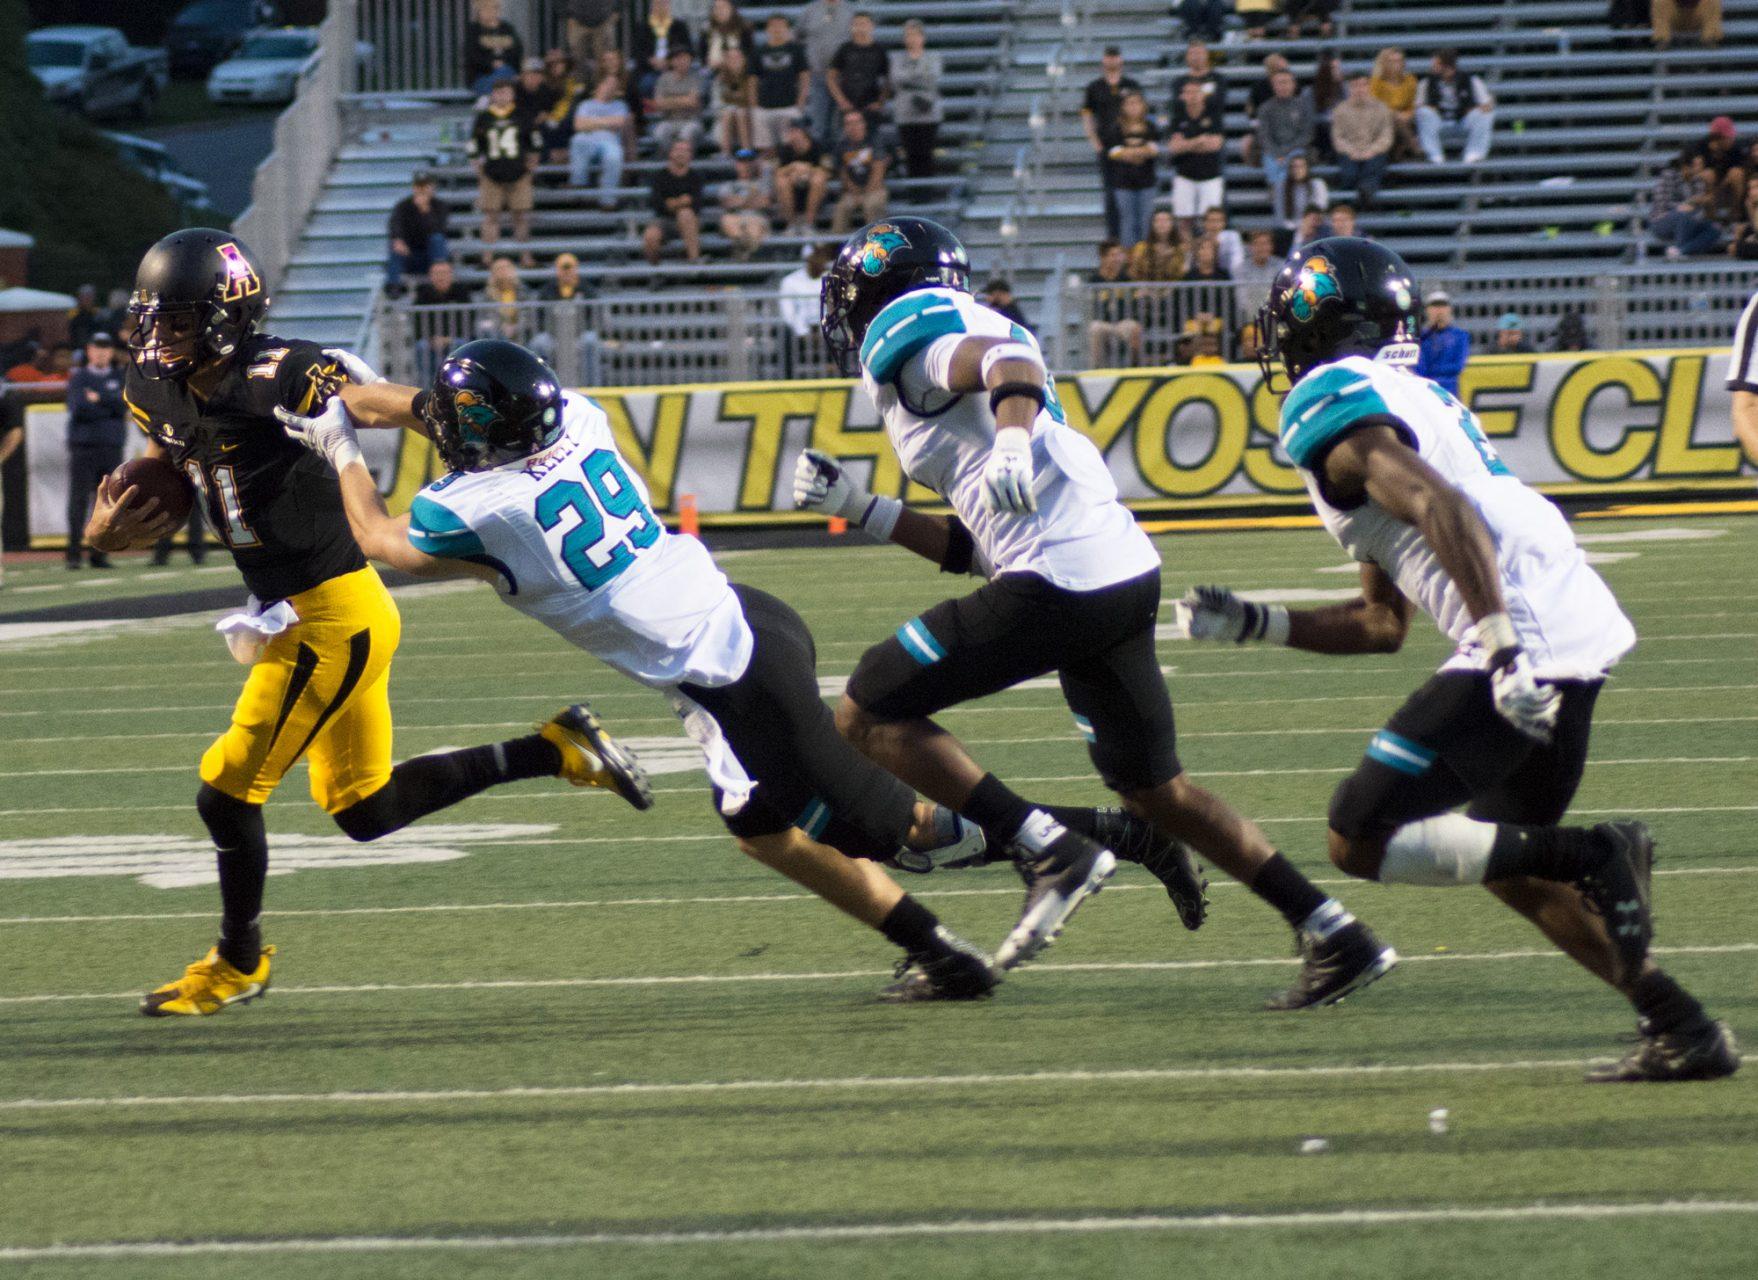 Taylor Lamb running for a first down against Coastal Carolina at Kidd Brewer Stadium.  Lamb set the all-time App State record for career passing touchdowns in todays win.